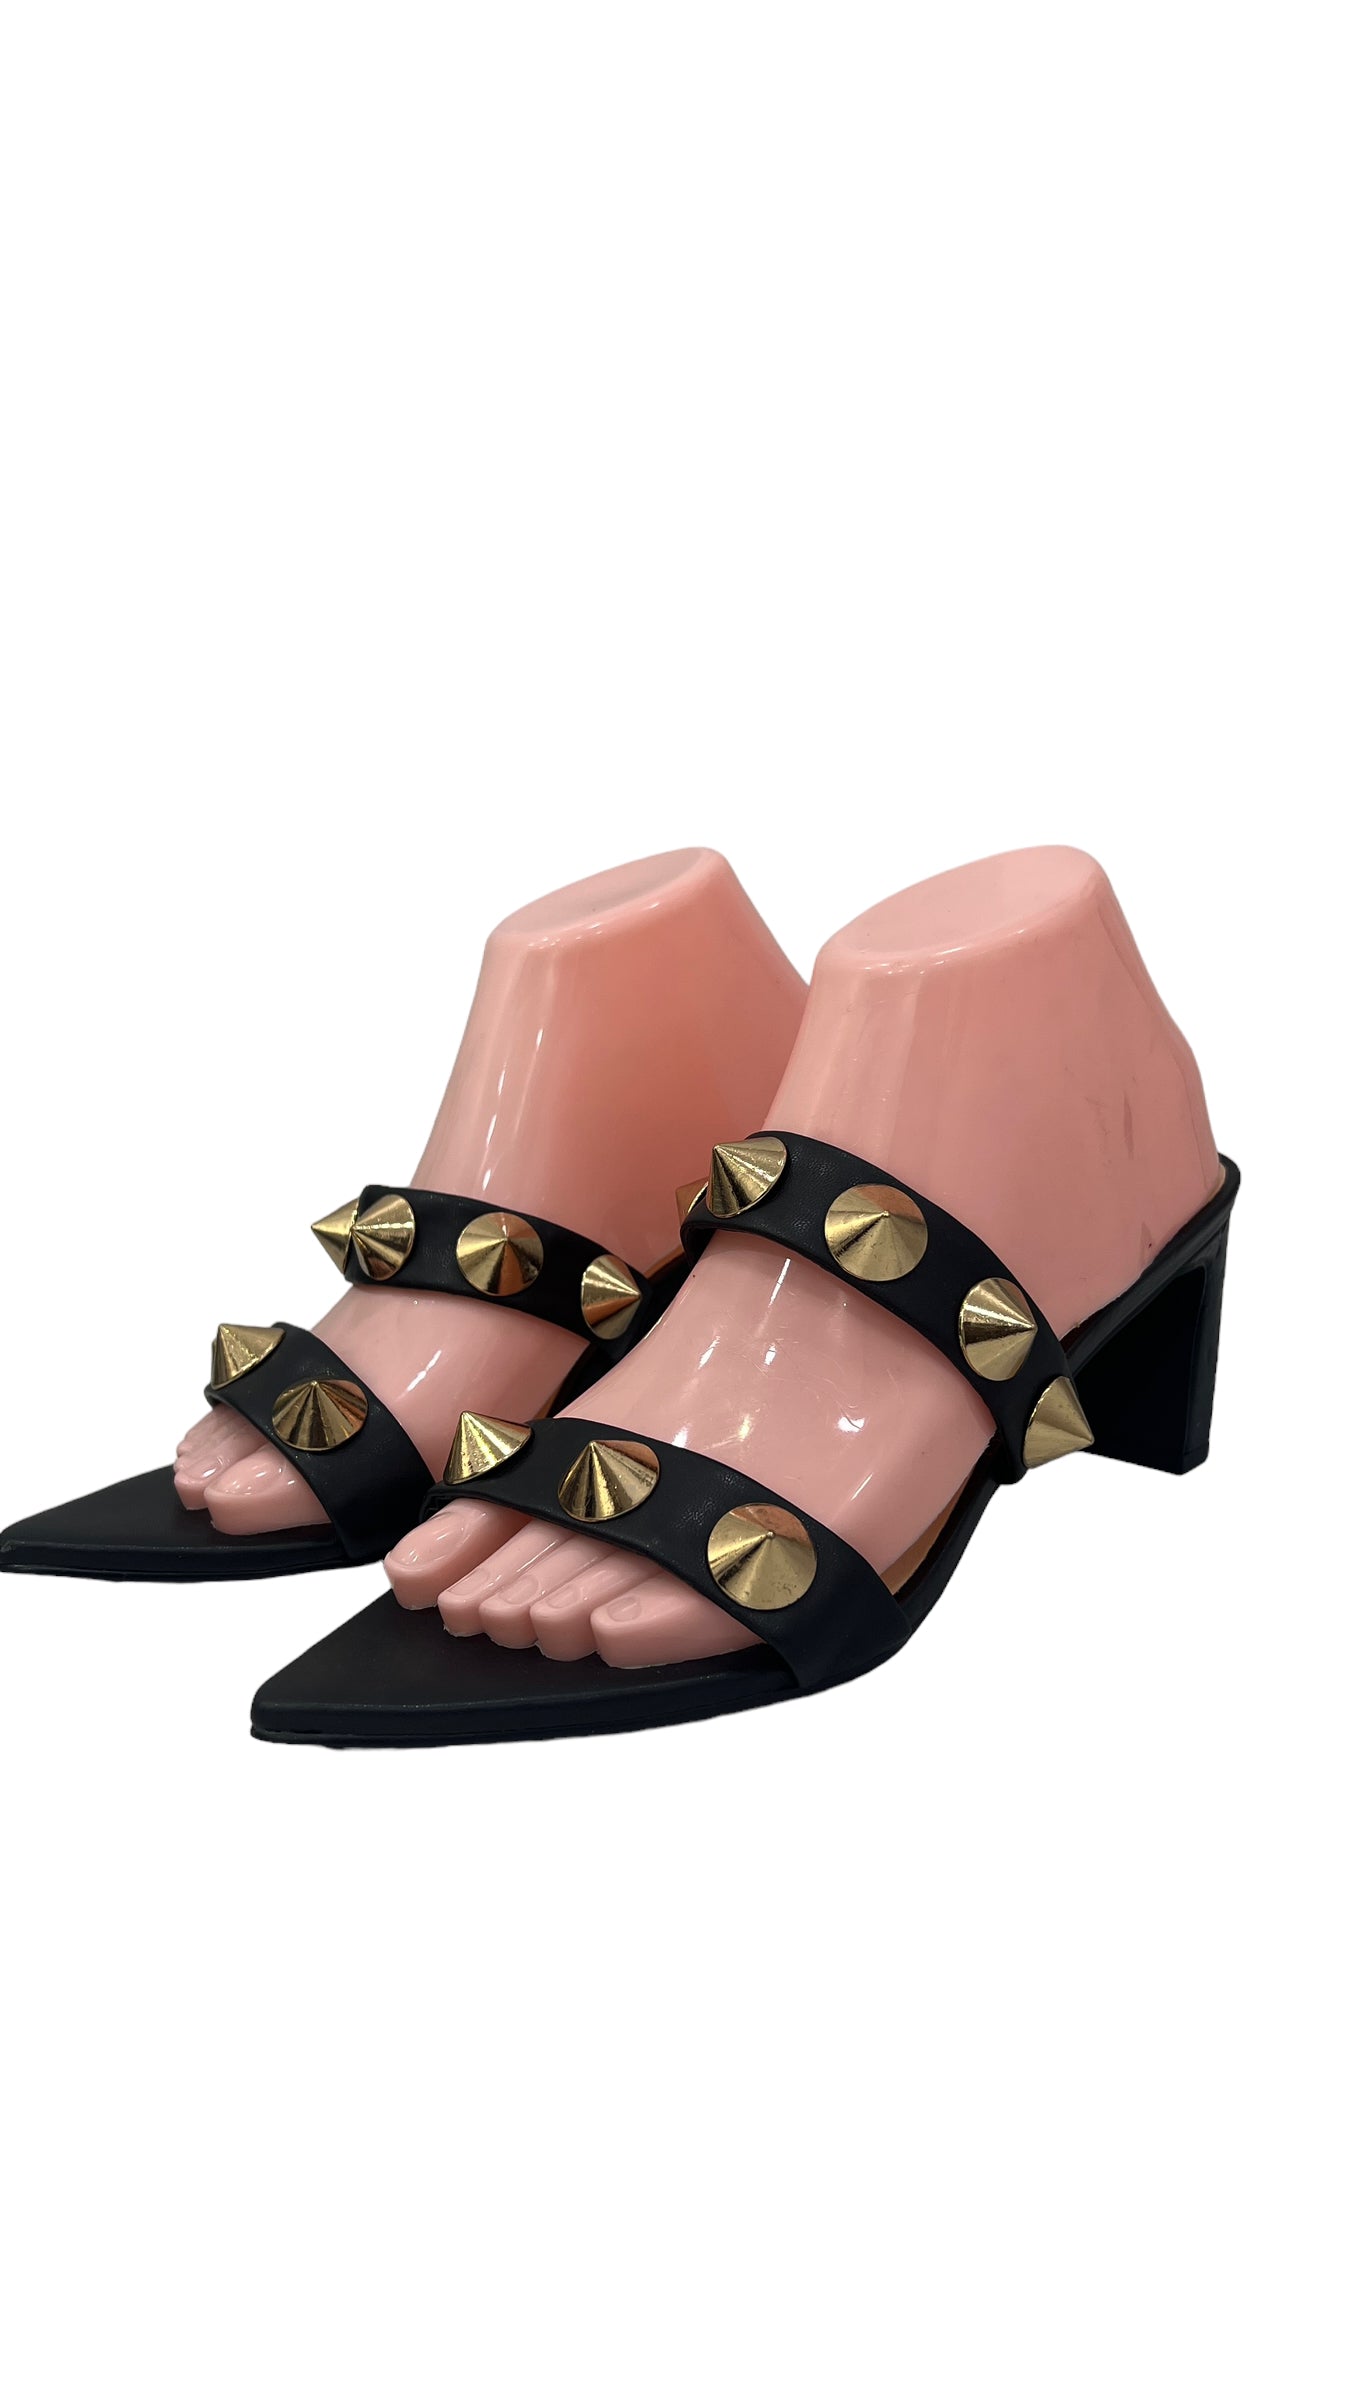 CHINESE LAUNDRY BLACK DOUBLE STRAP BLOCK HEELS WITH MICRO STUDS